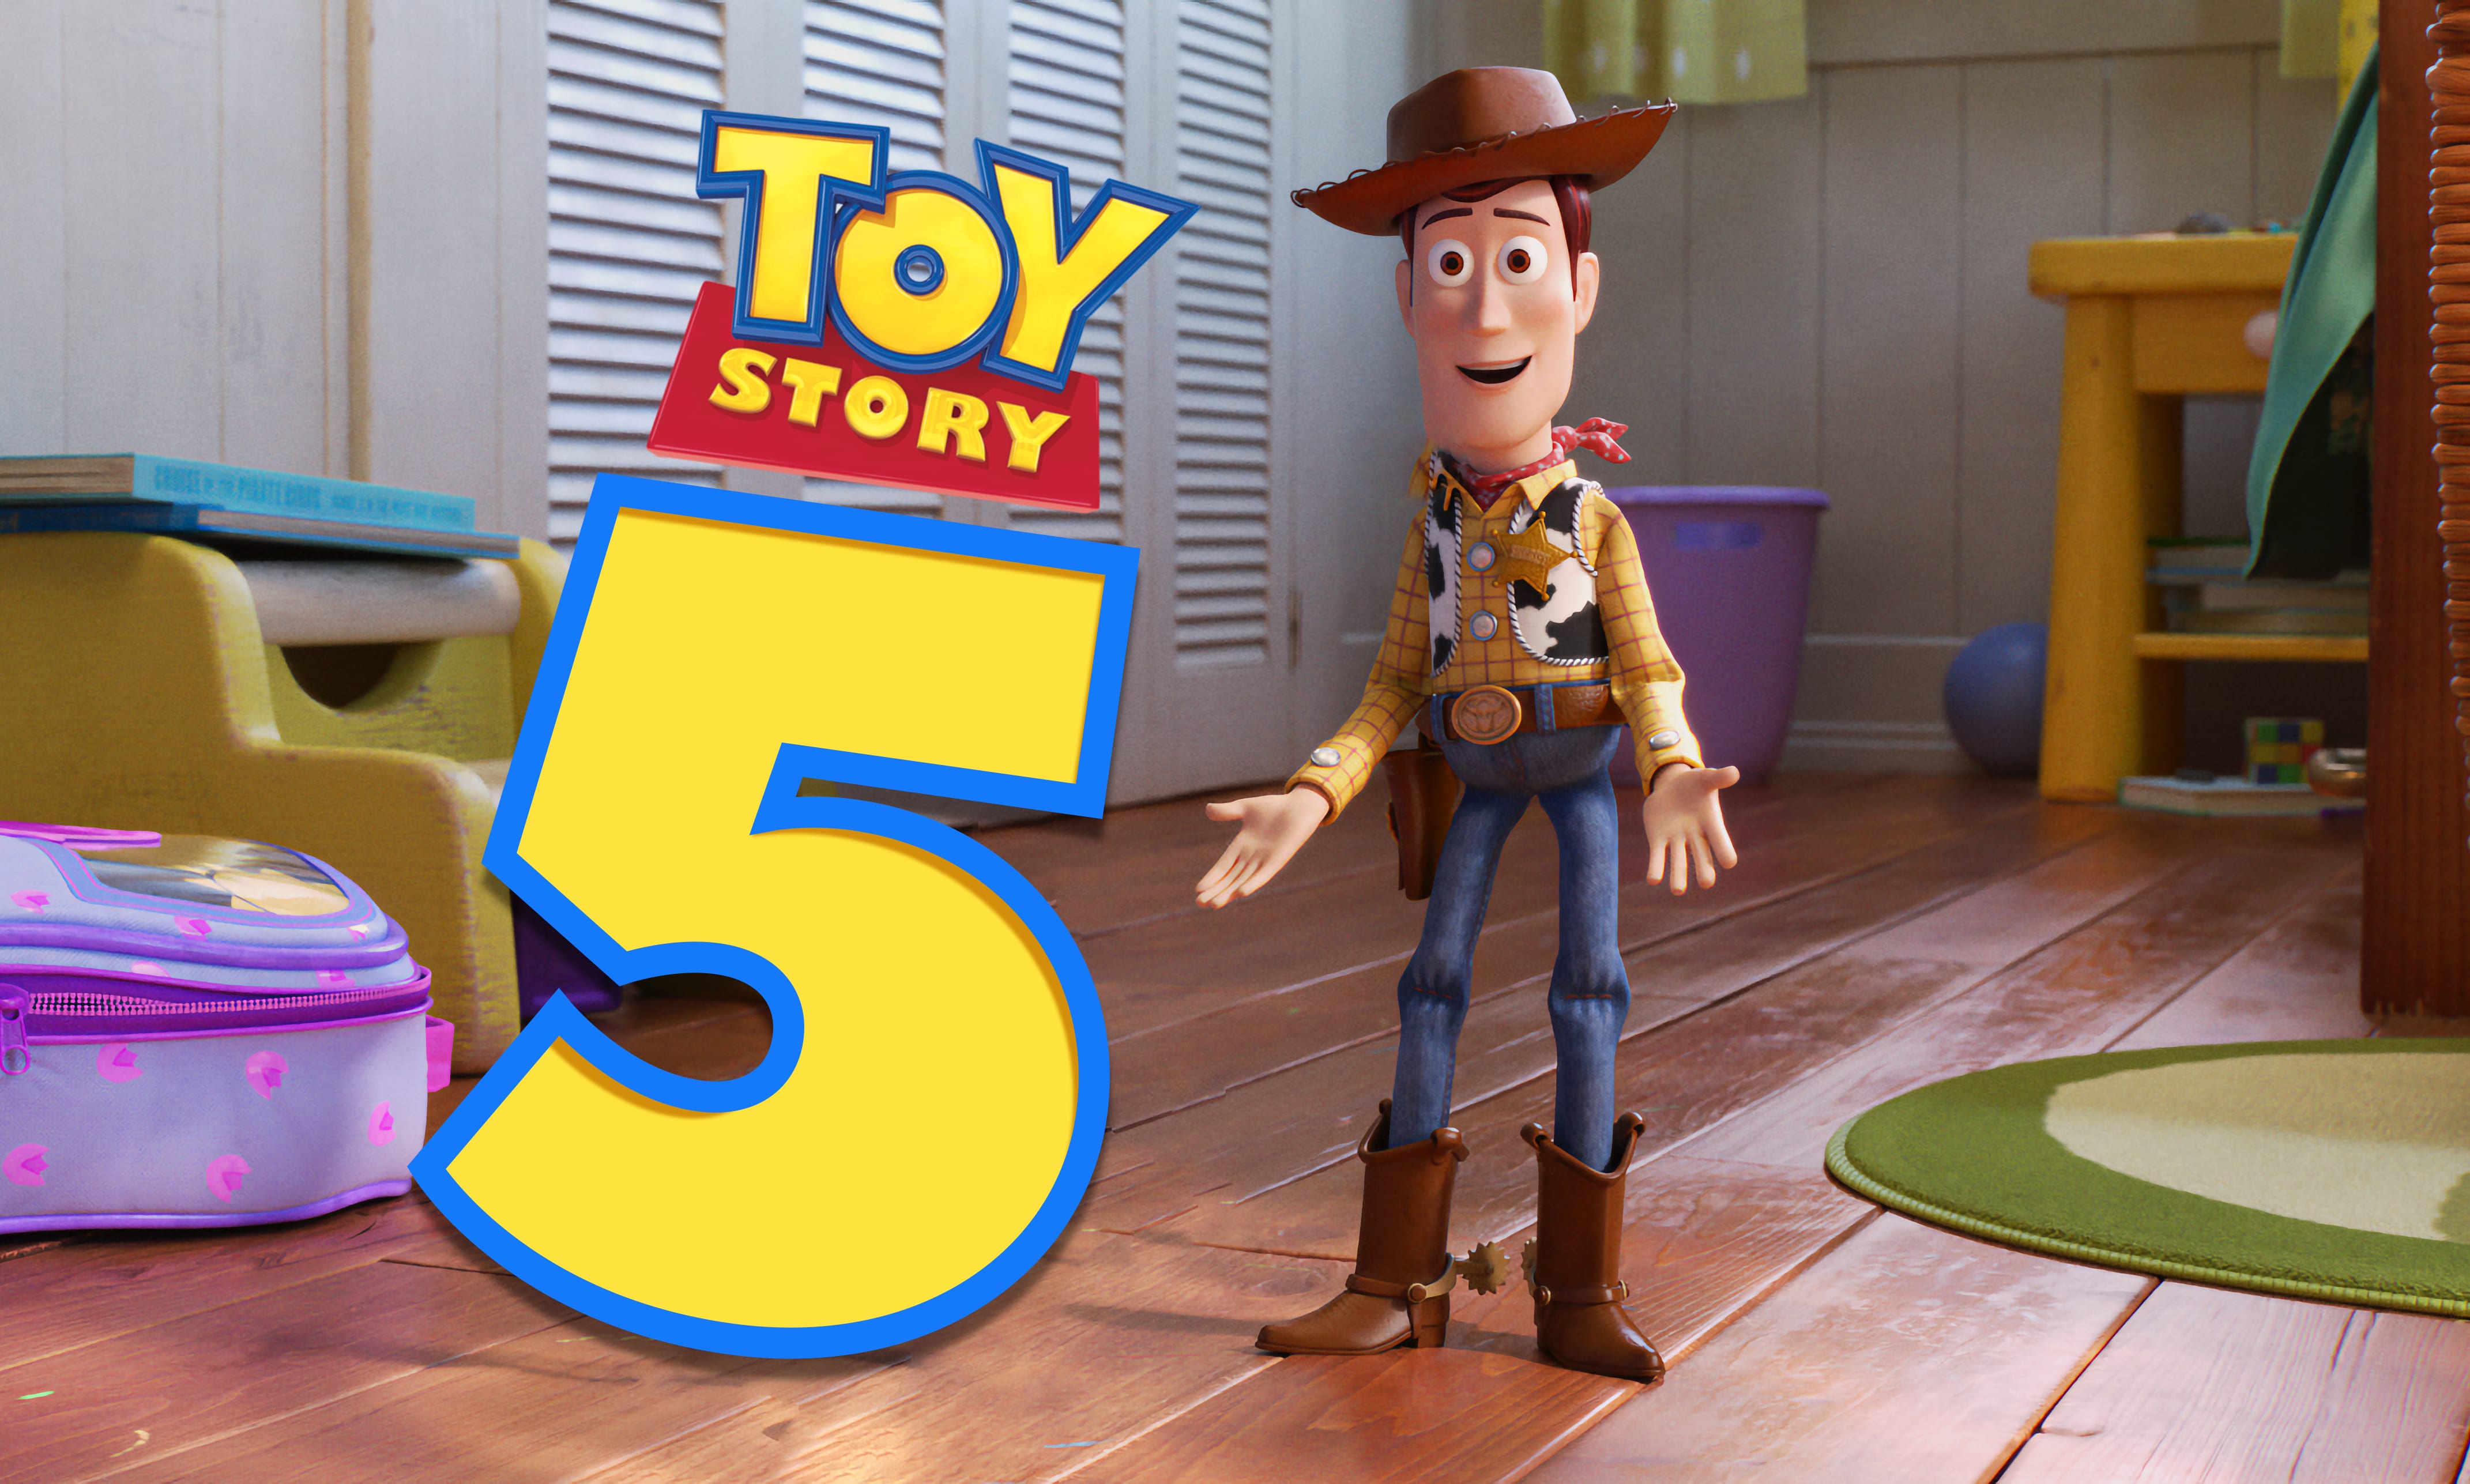 Is There Going to Be a 'Toy Story 5'? Release Date, Plot